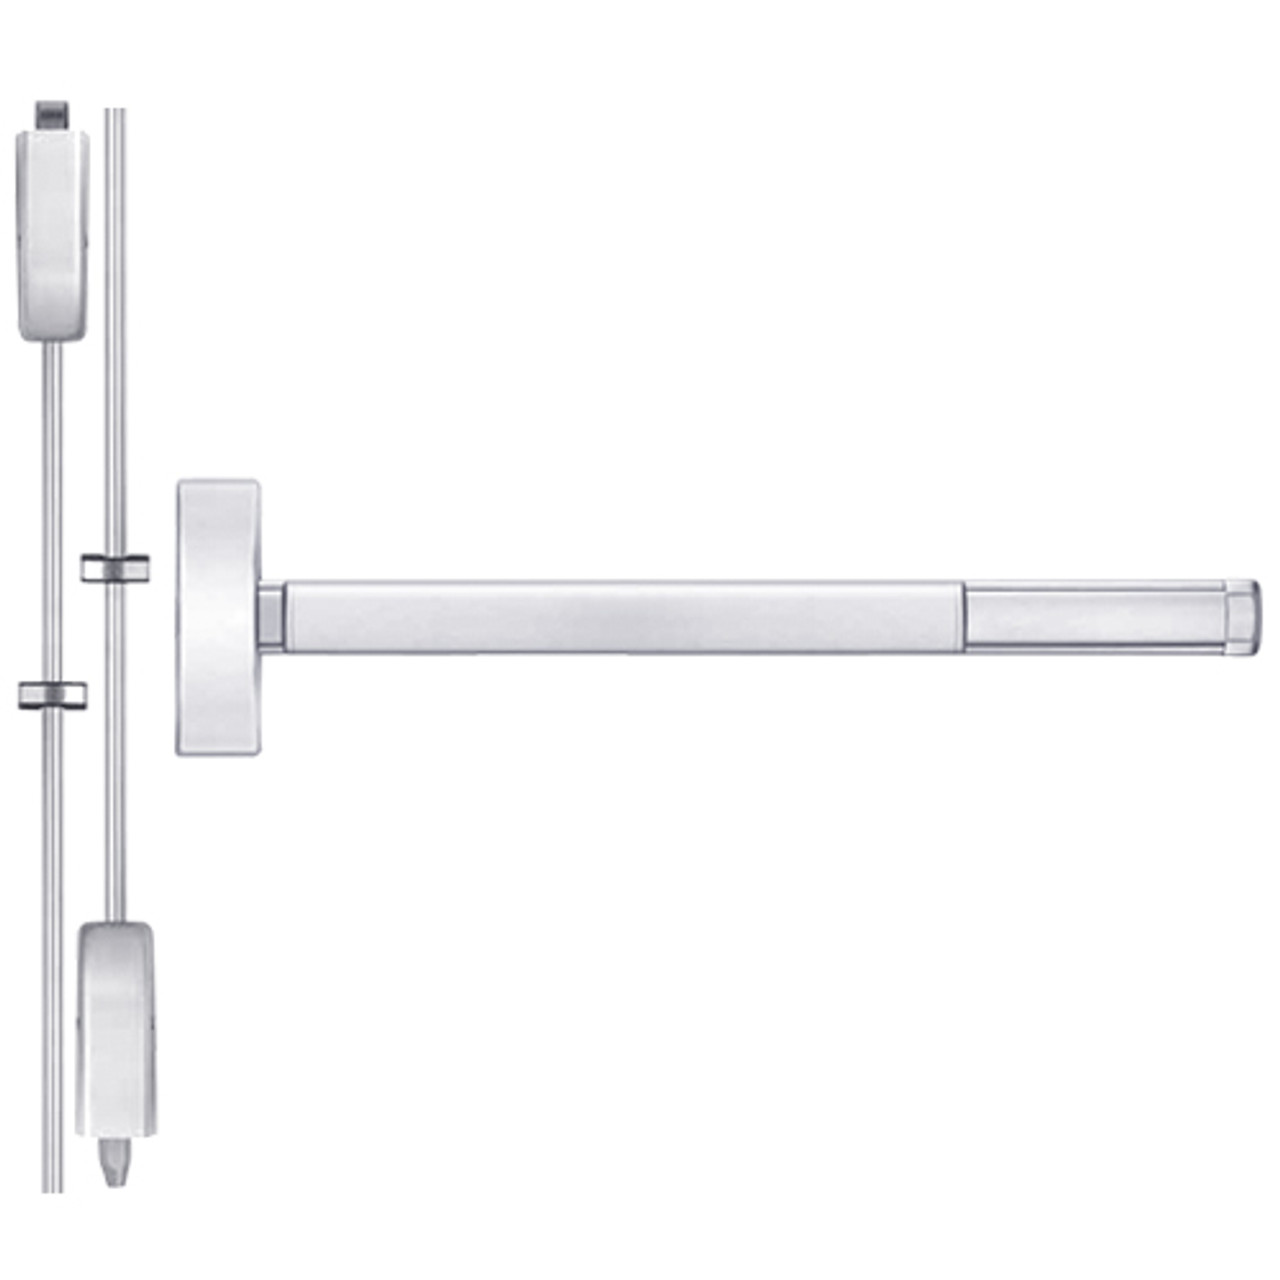 TS2203LBR-625-36 PHI 2200 Series Non Fire Rated Apex Surface Vertical Rod Device with Touchbar Monitoring Switch Prepped for Key Retracts Latchbolt in Bright Chrome Finish